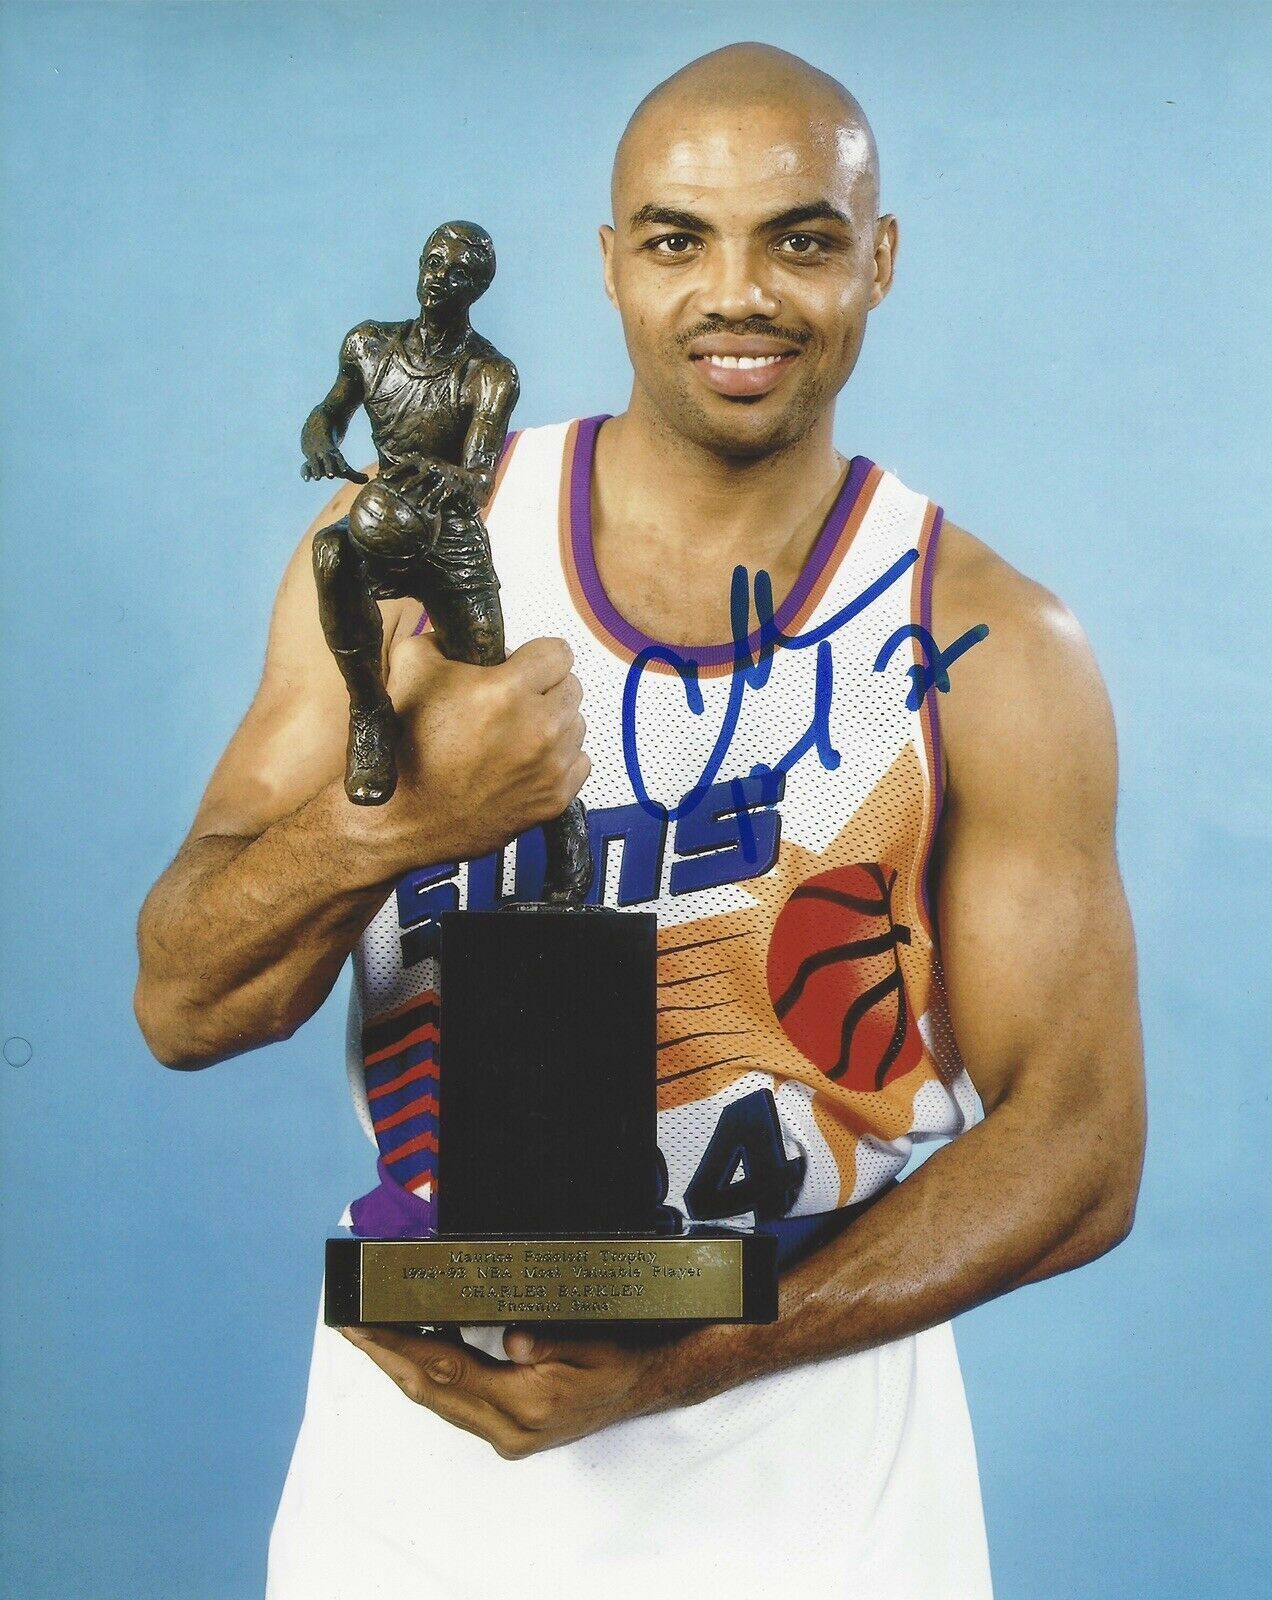 Charles Barkley Autographed Signed 8x10 Photo Poster painting ( HOF Suns ) REPRINT